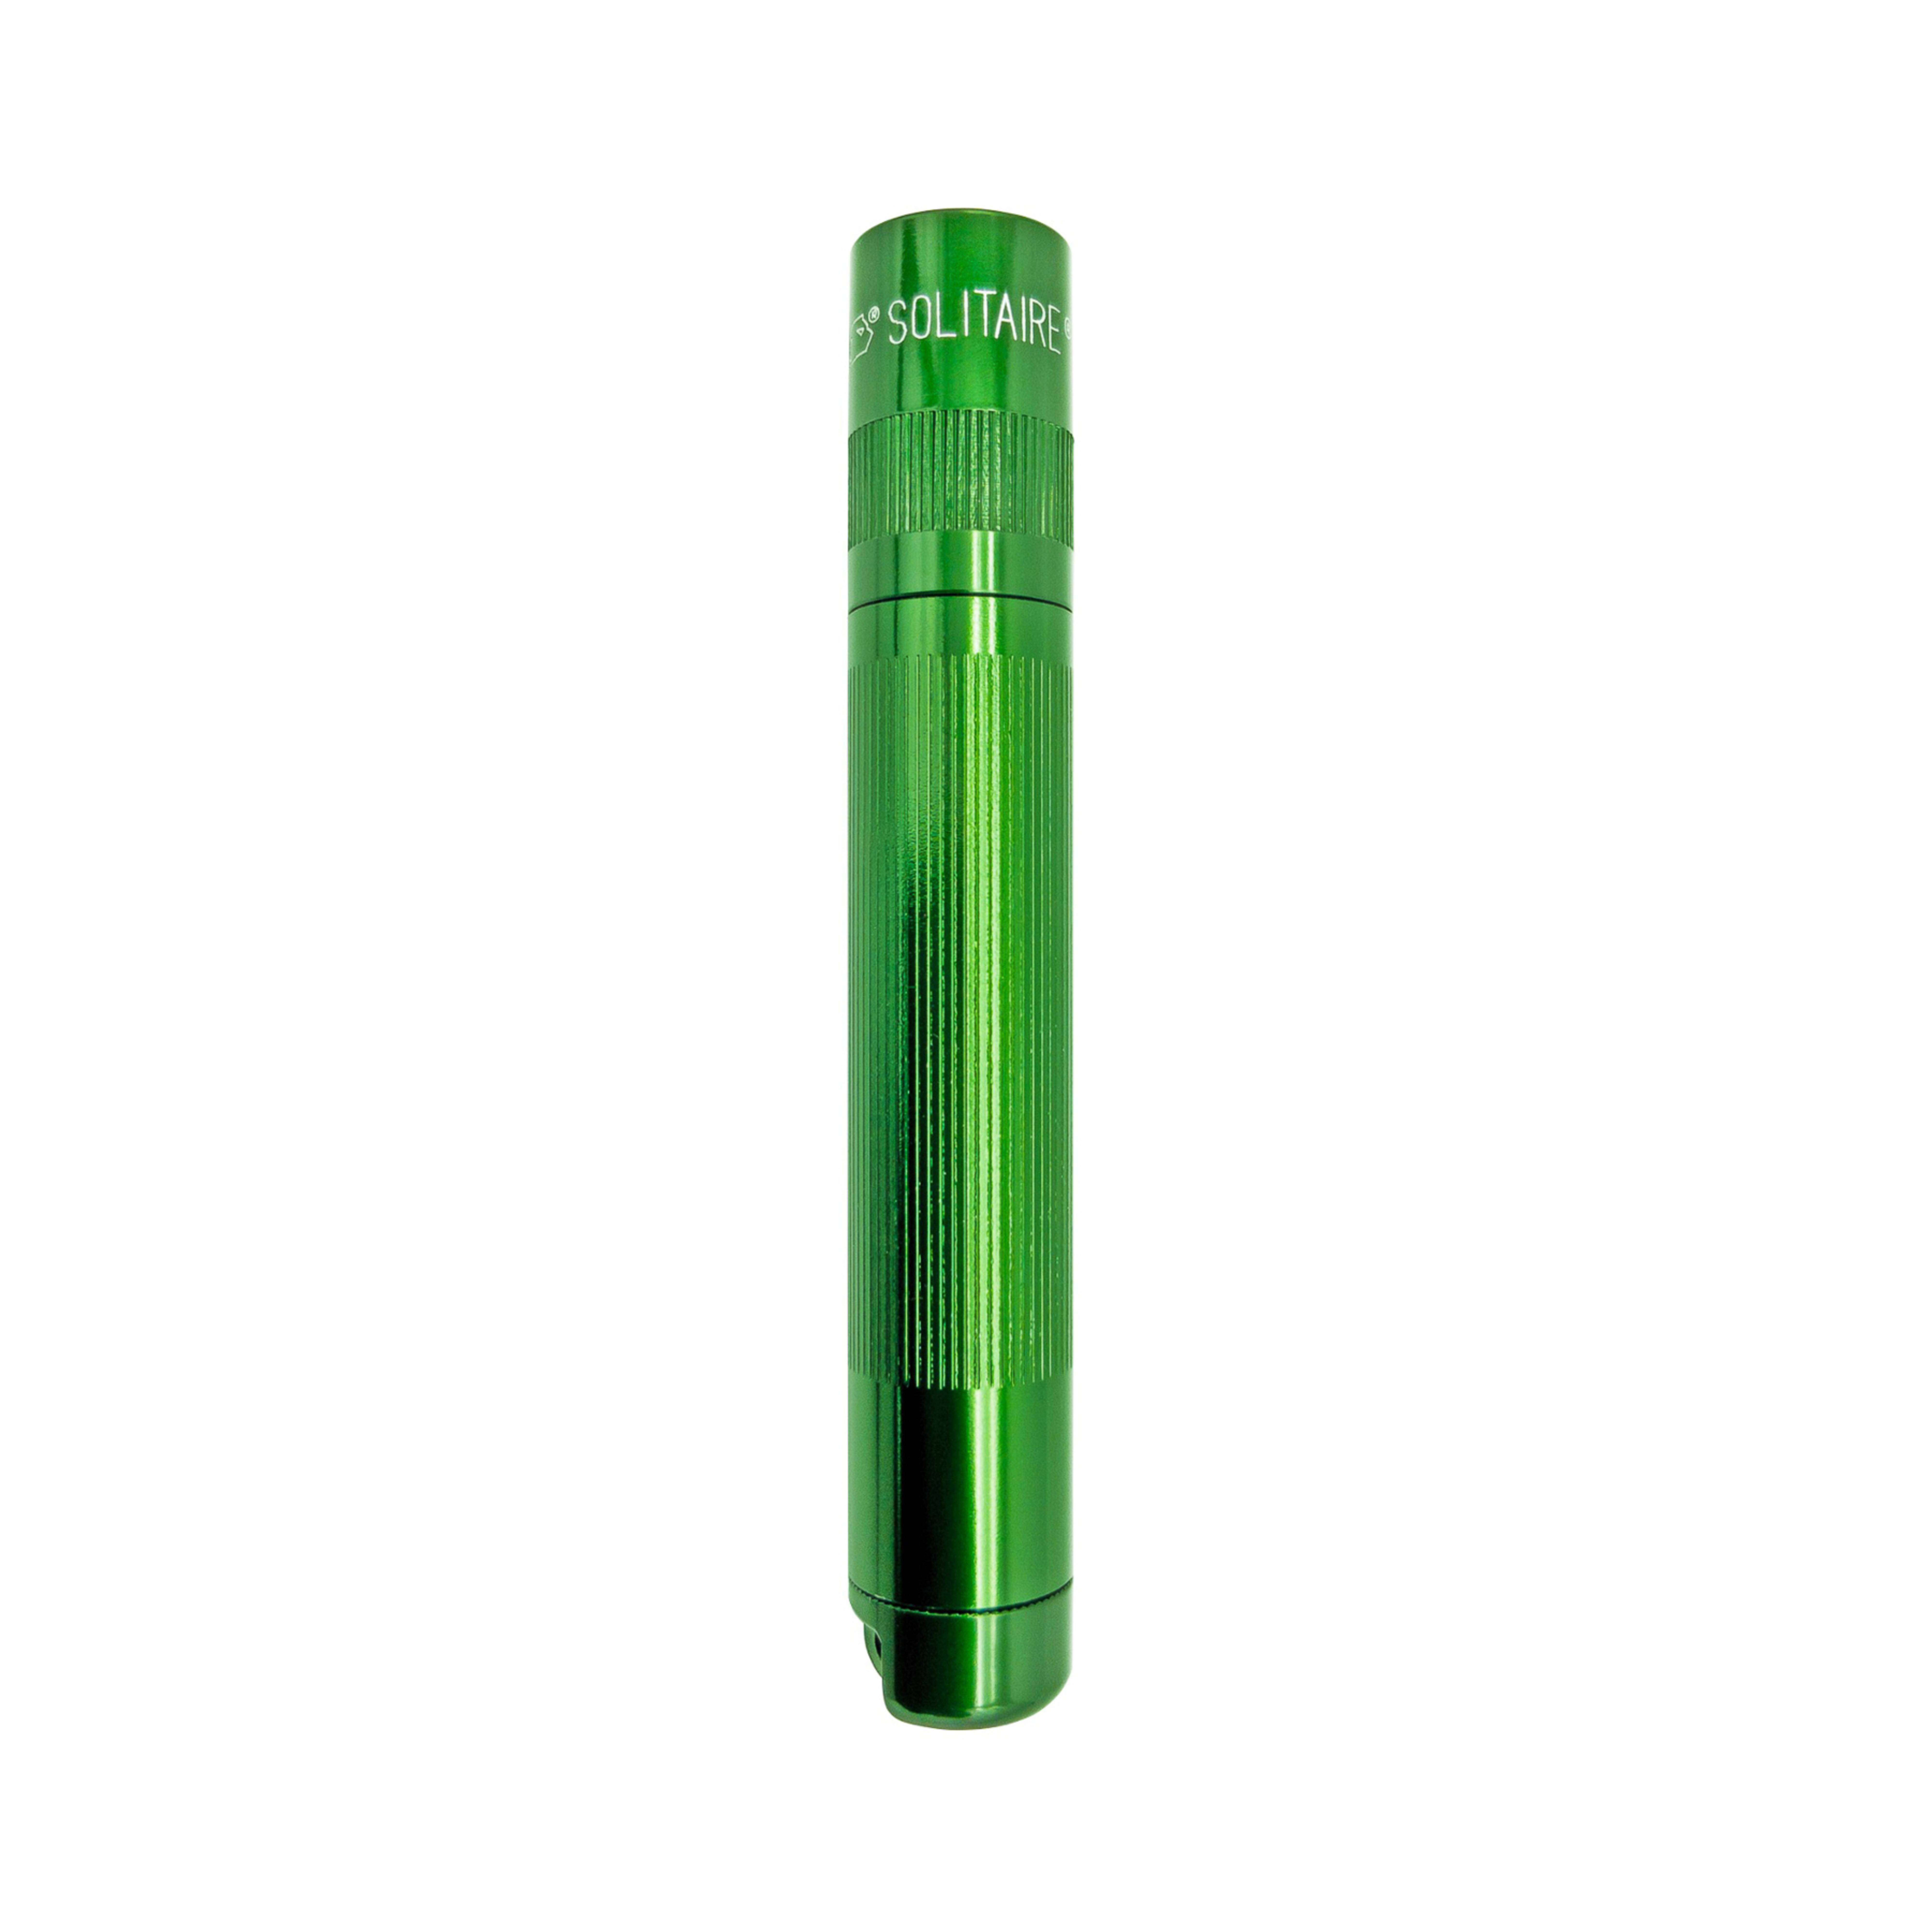 Maglite Linterna LED Solitaire, 1 Cell AAA, verde